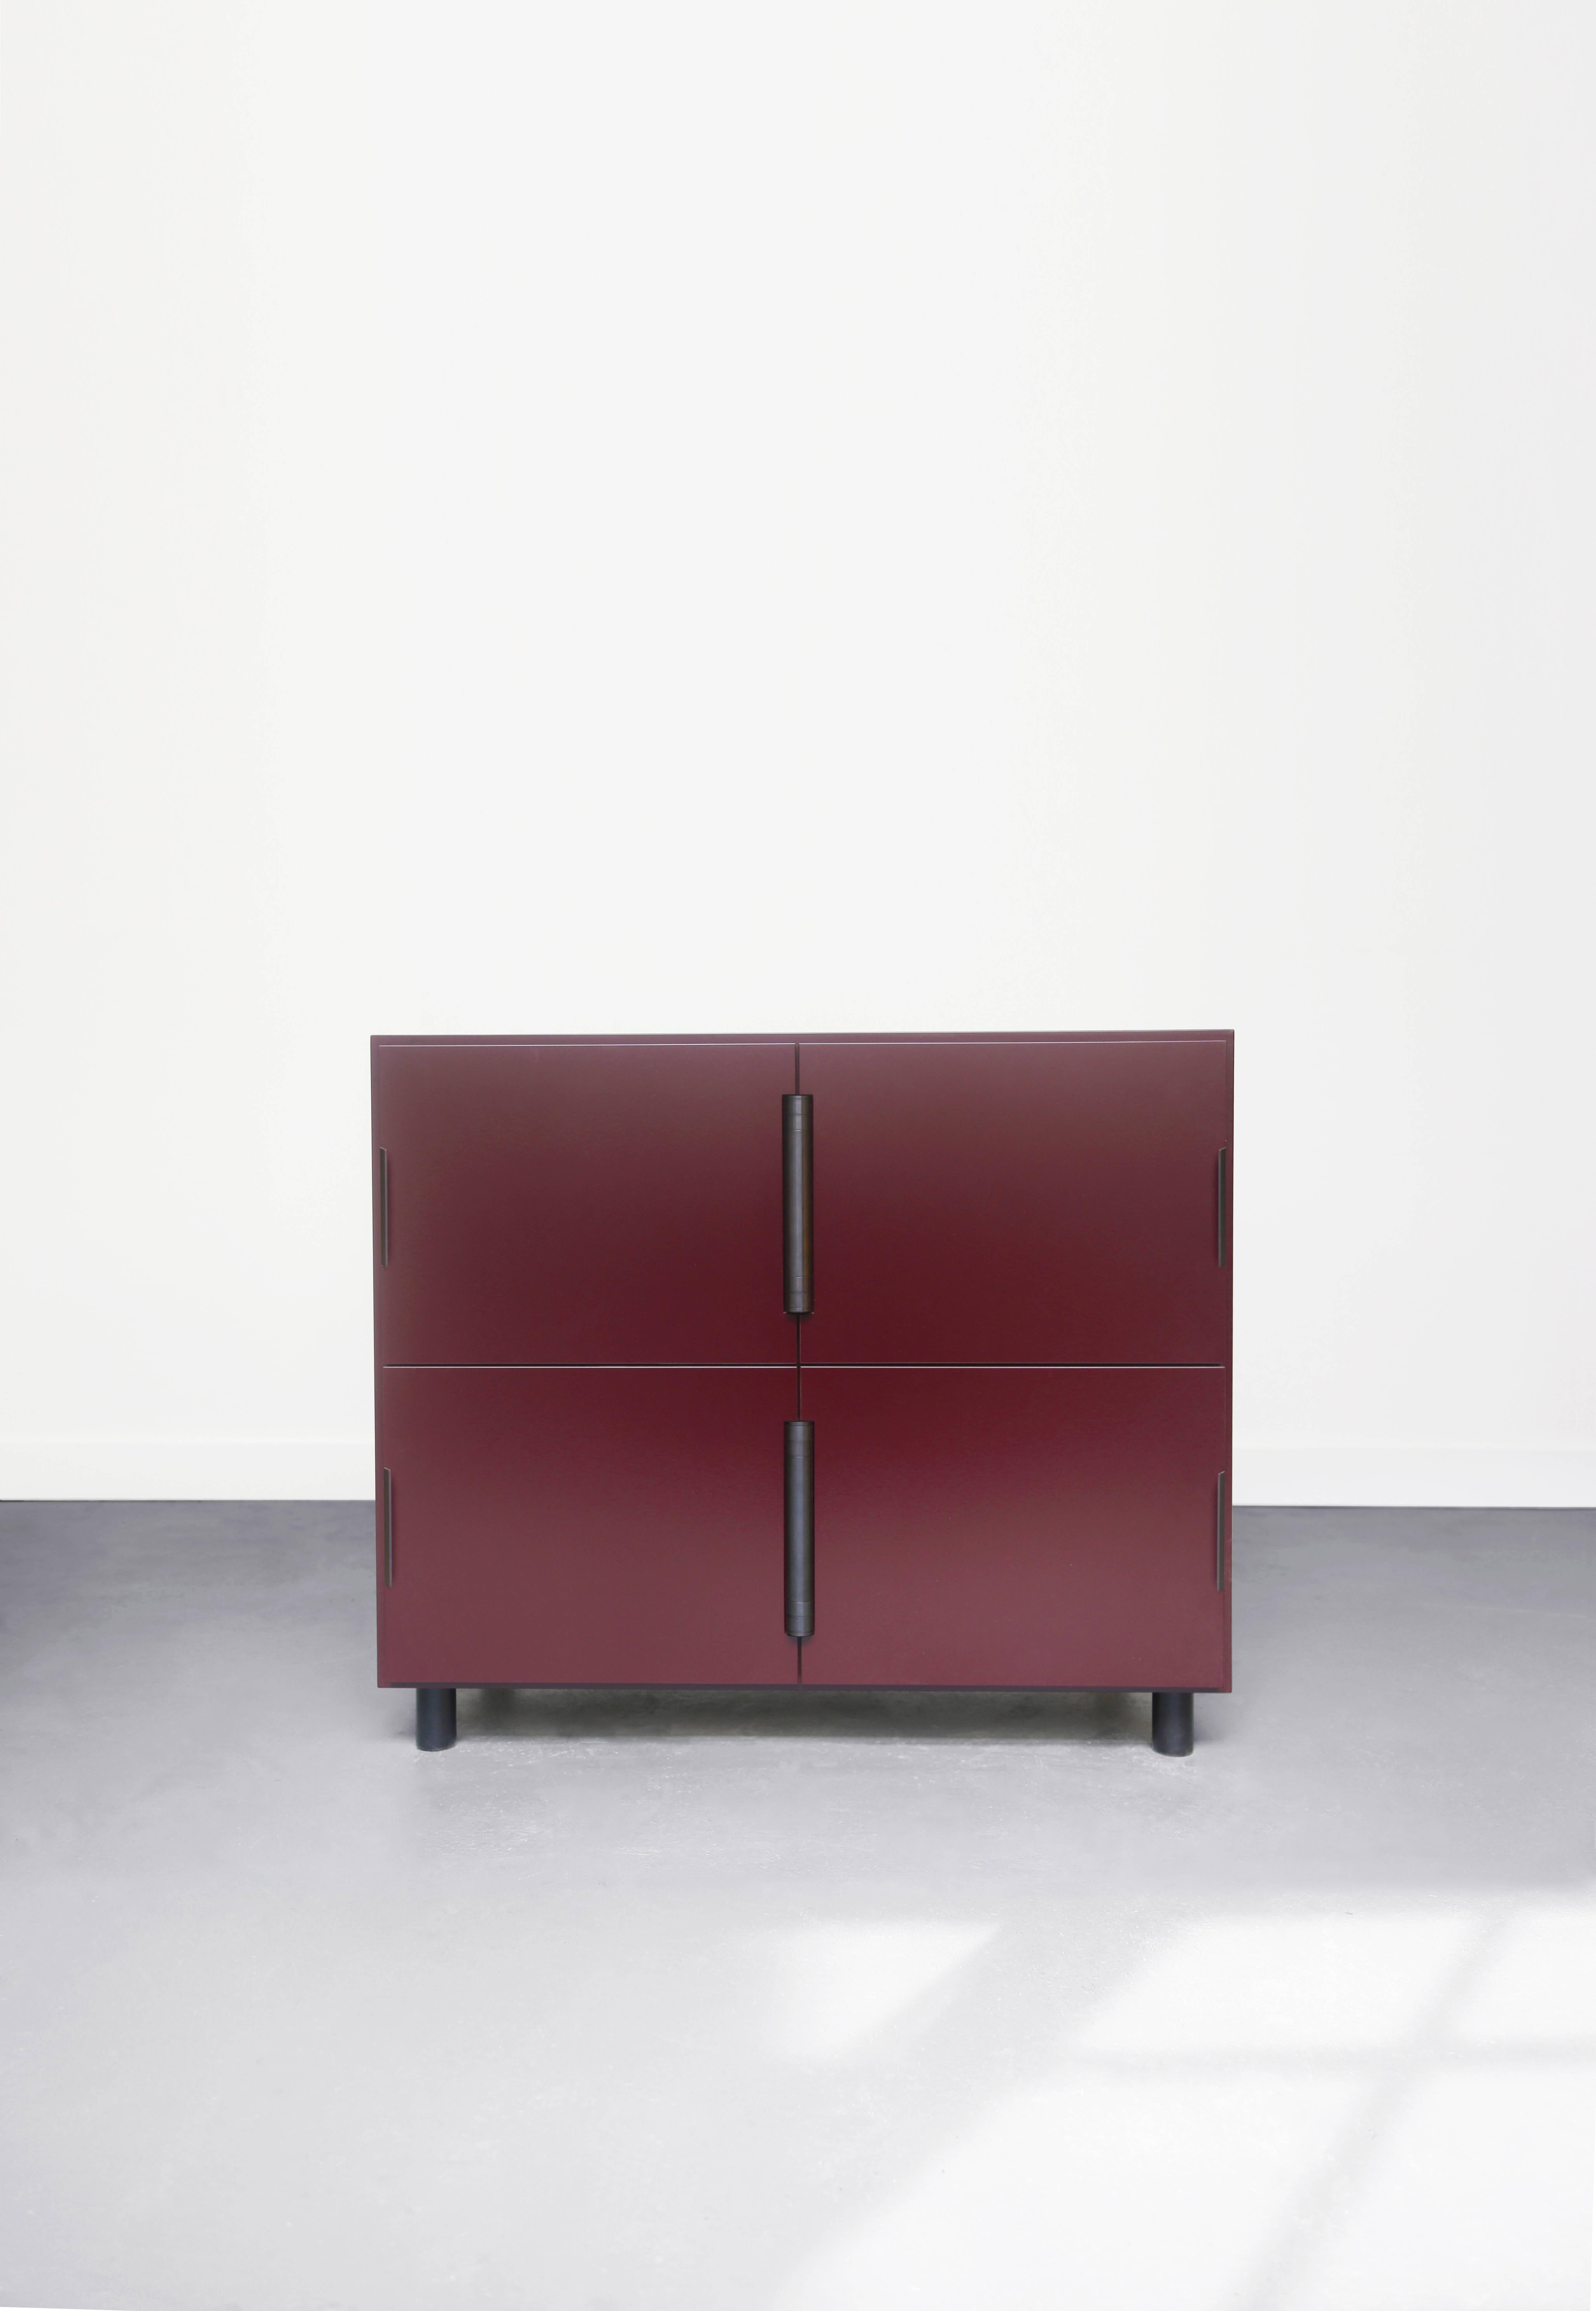 Nocturne is a multi-use storage cabinet with an austere beauty. Its center-hung doors swing inward on a shared hinge. The modern case is matte lacquered wood with sophisticated blackened steel hardware. 

Available finishes: 
Oxblood and